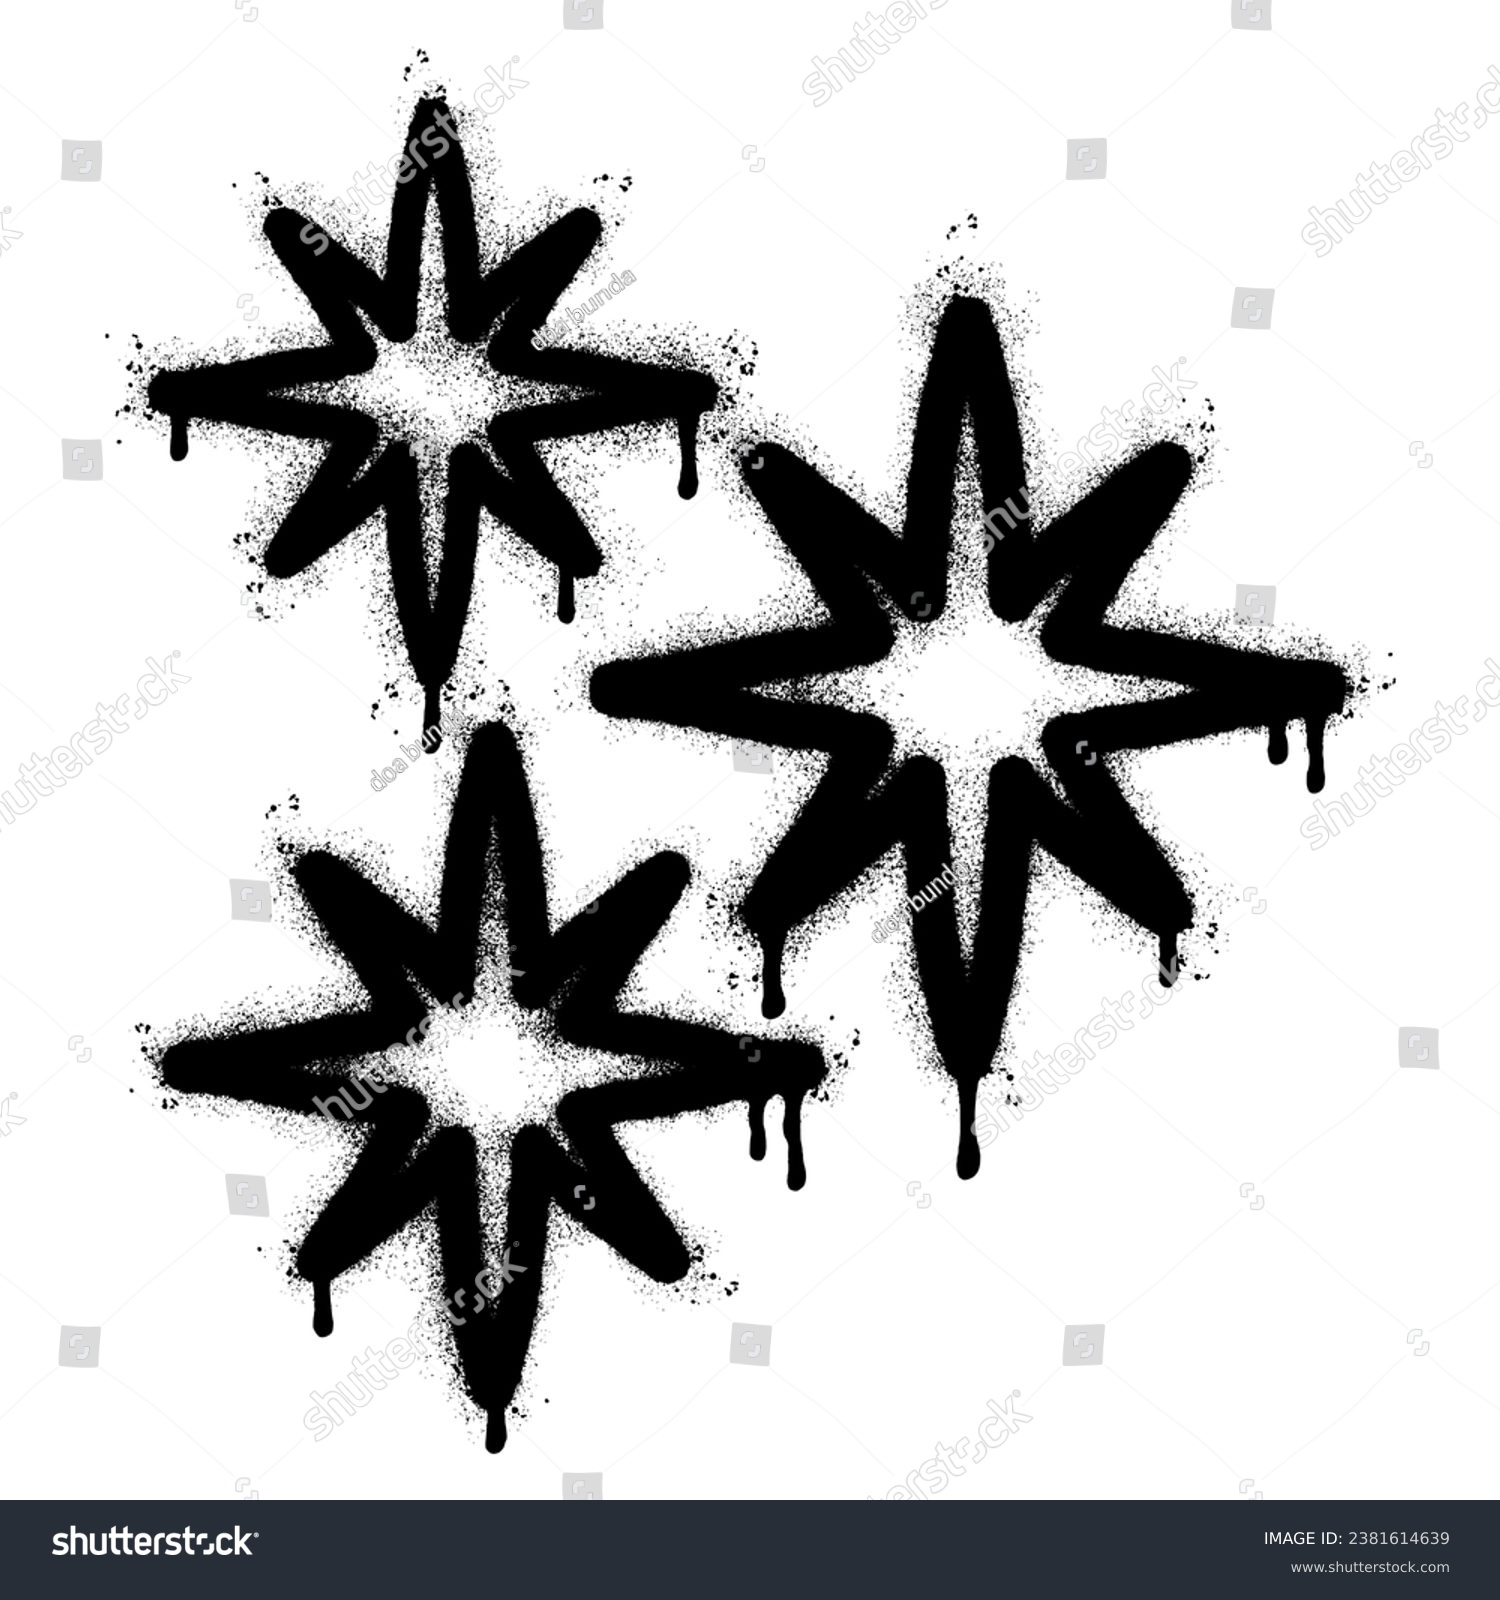 SVG of Spray Painted Graffiti stars sparkle icon icon Sprayed isolated with a white background. graffiti shining burst with over spray in black over white. svg